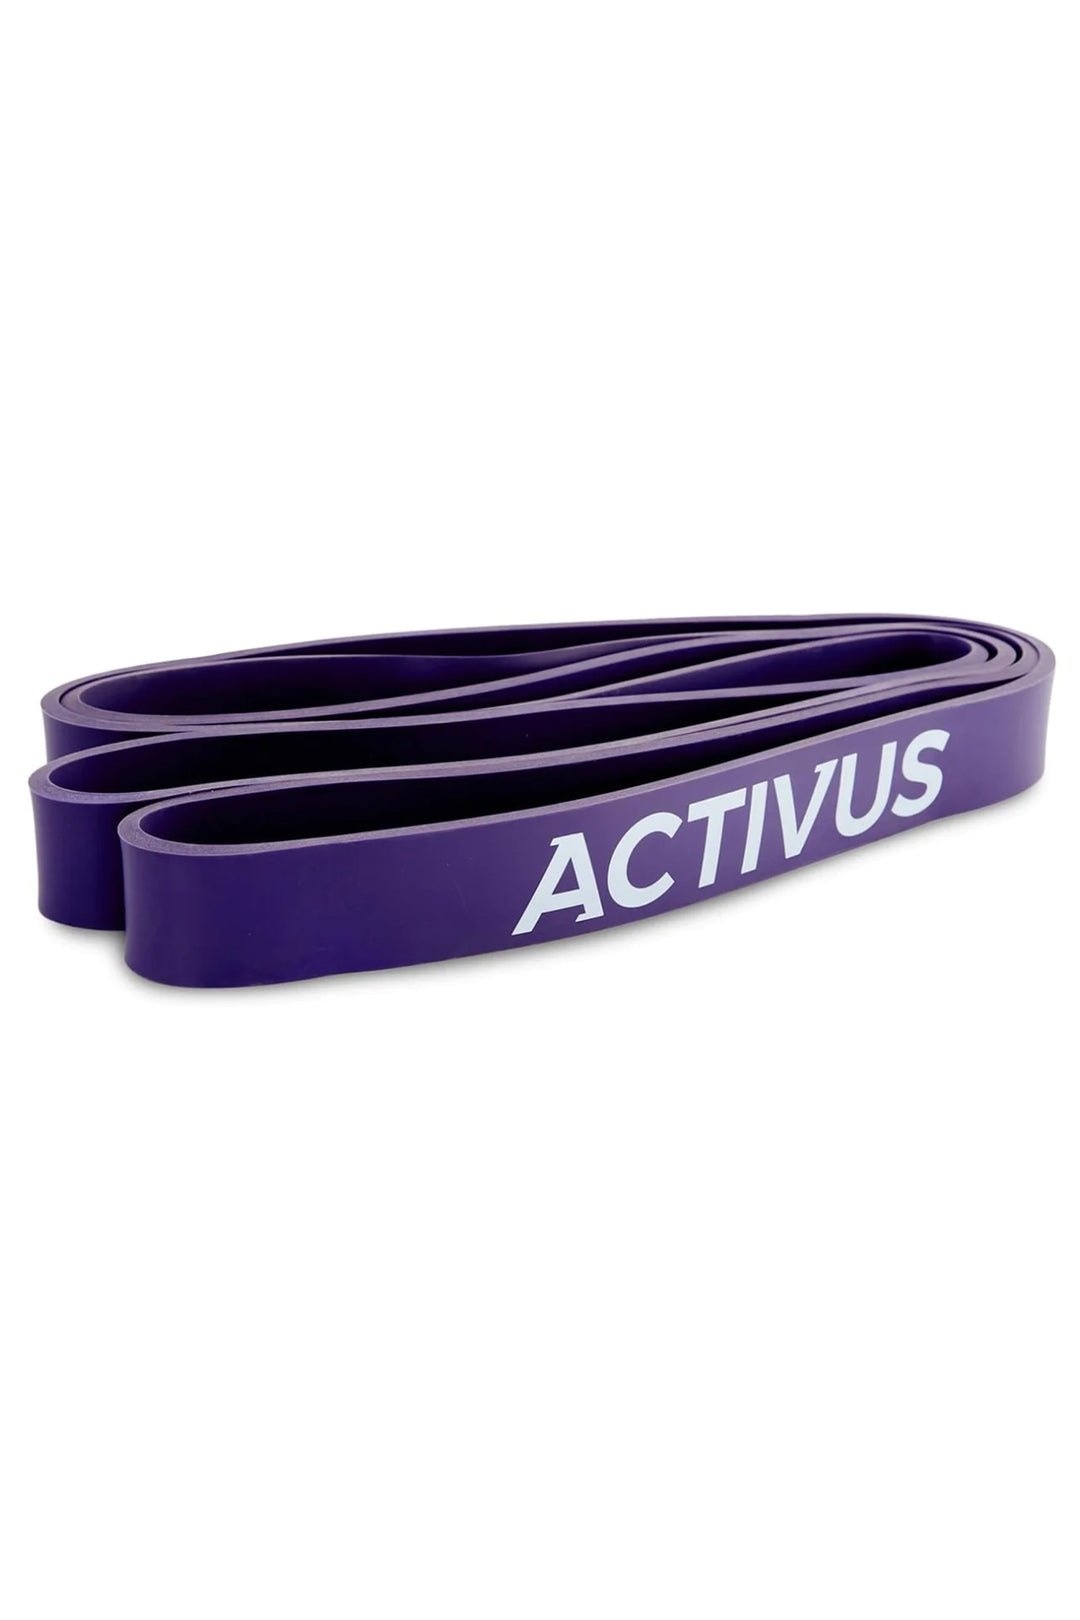 Picture of the purple, strong power band